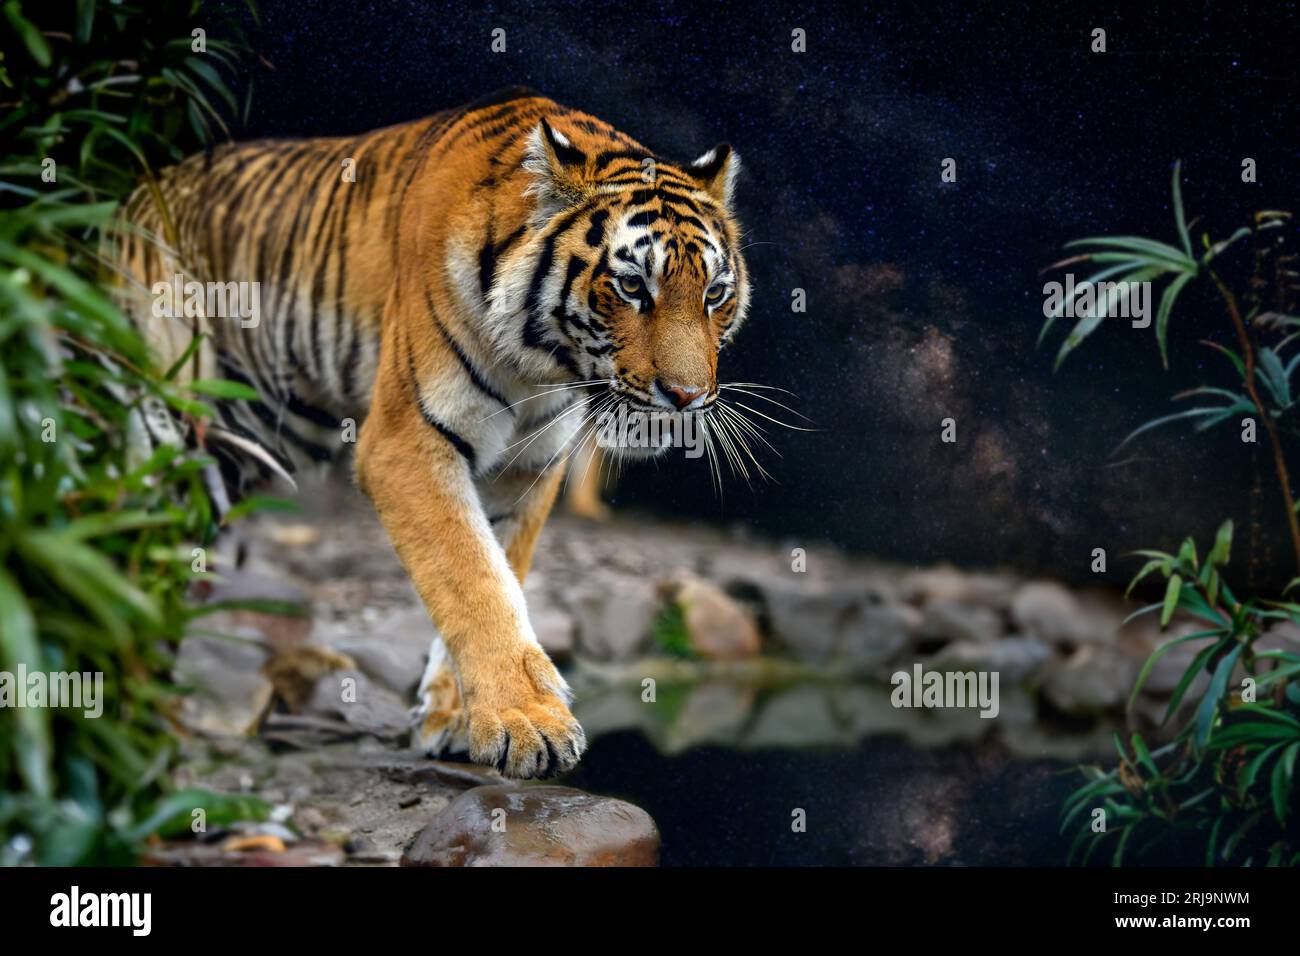 Close up adult tiger portrait in jungle on night sky background with Milky Way Stock Photo